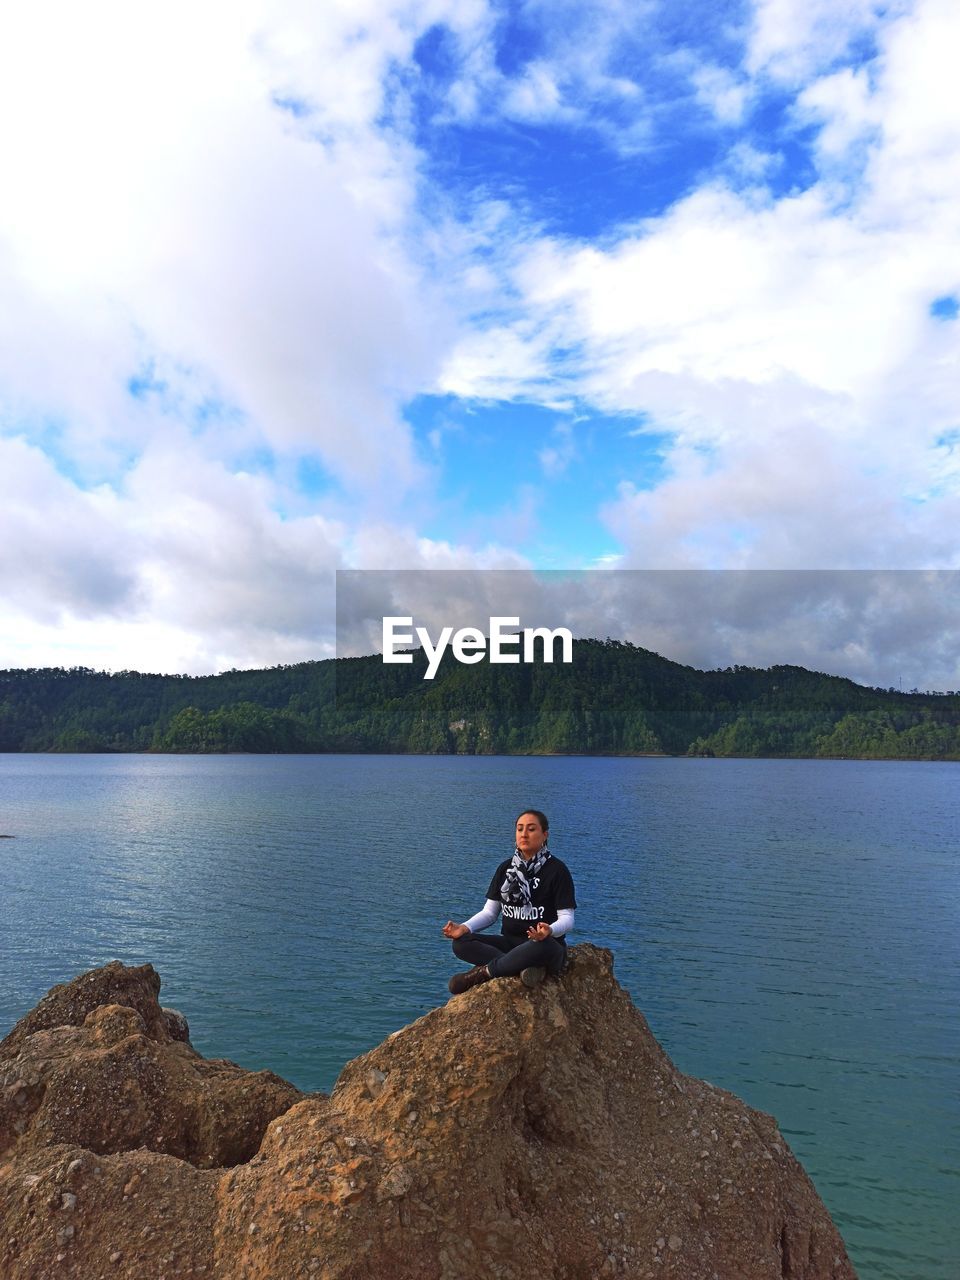 PERSON SITTING ON ROCK BY LAKE AGAINST SKY